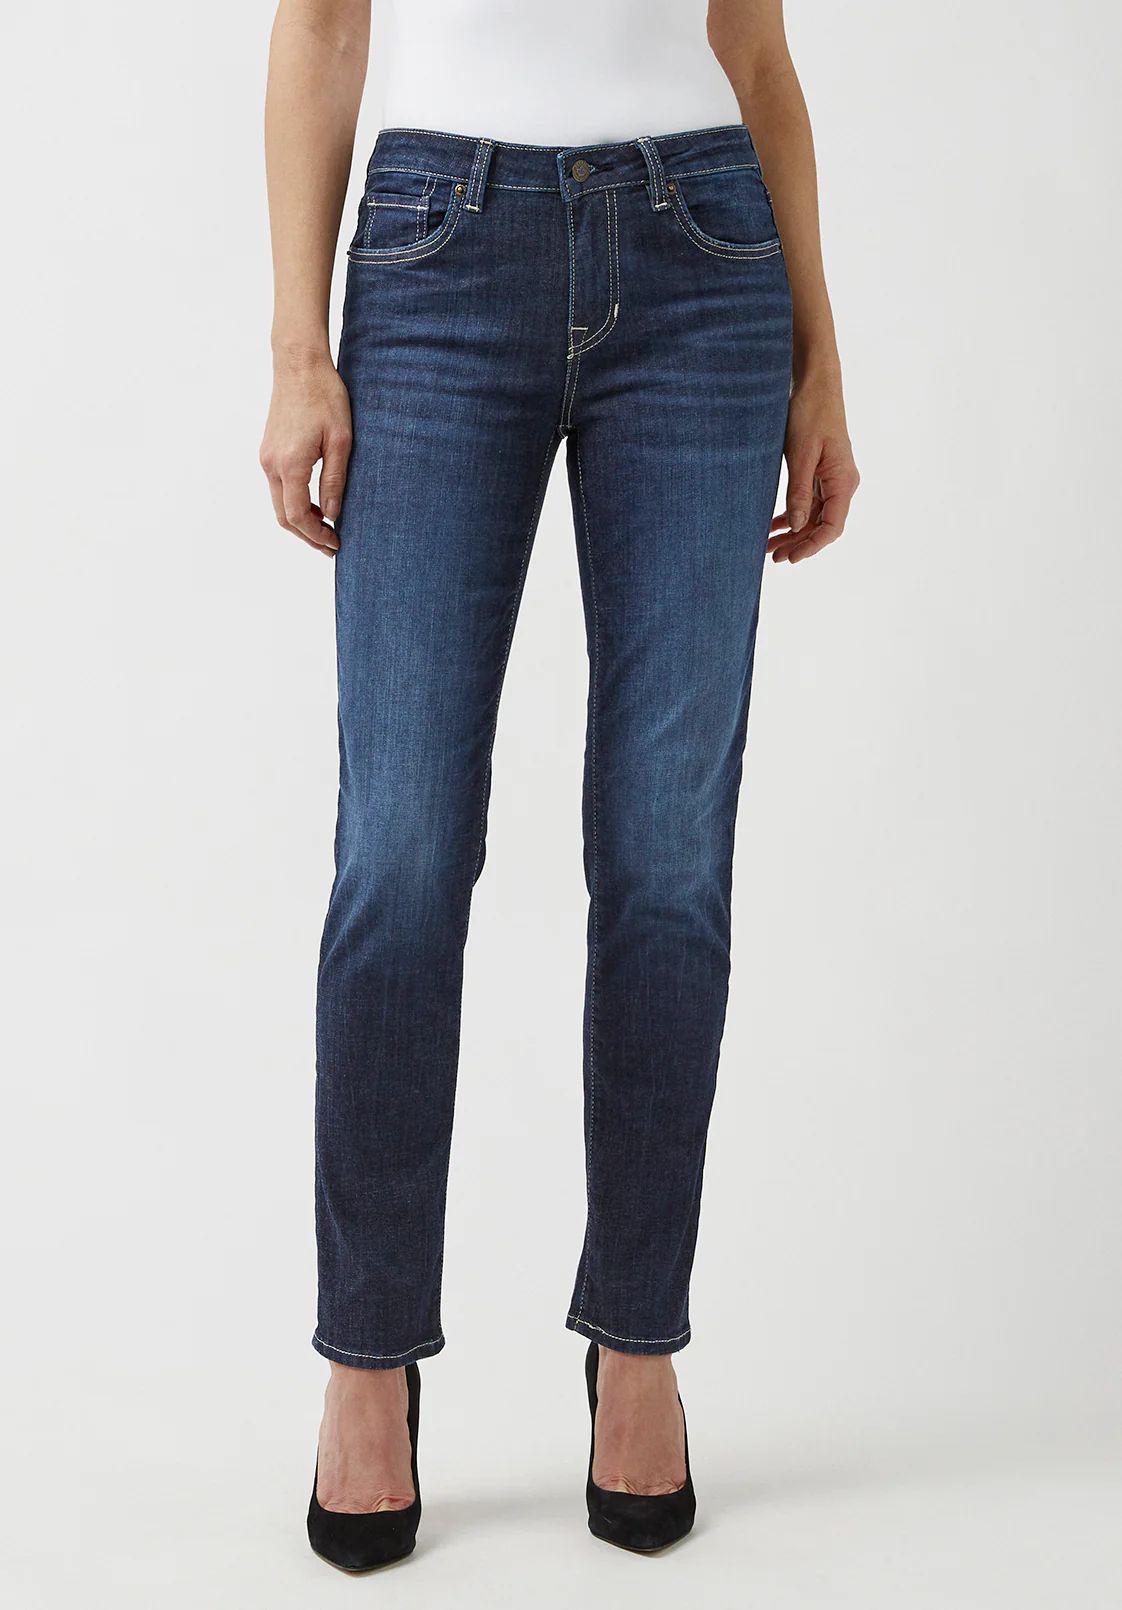 Mid Rise Slim Carrie Reckless Blue Jeans - BL15674 | Buffalo David Bitton